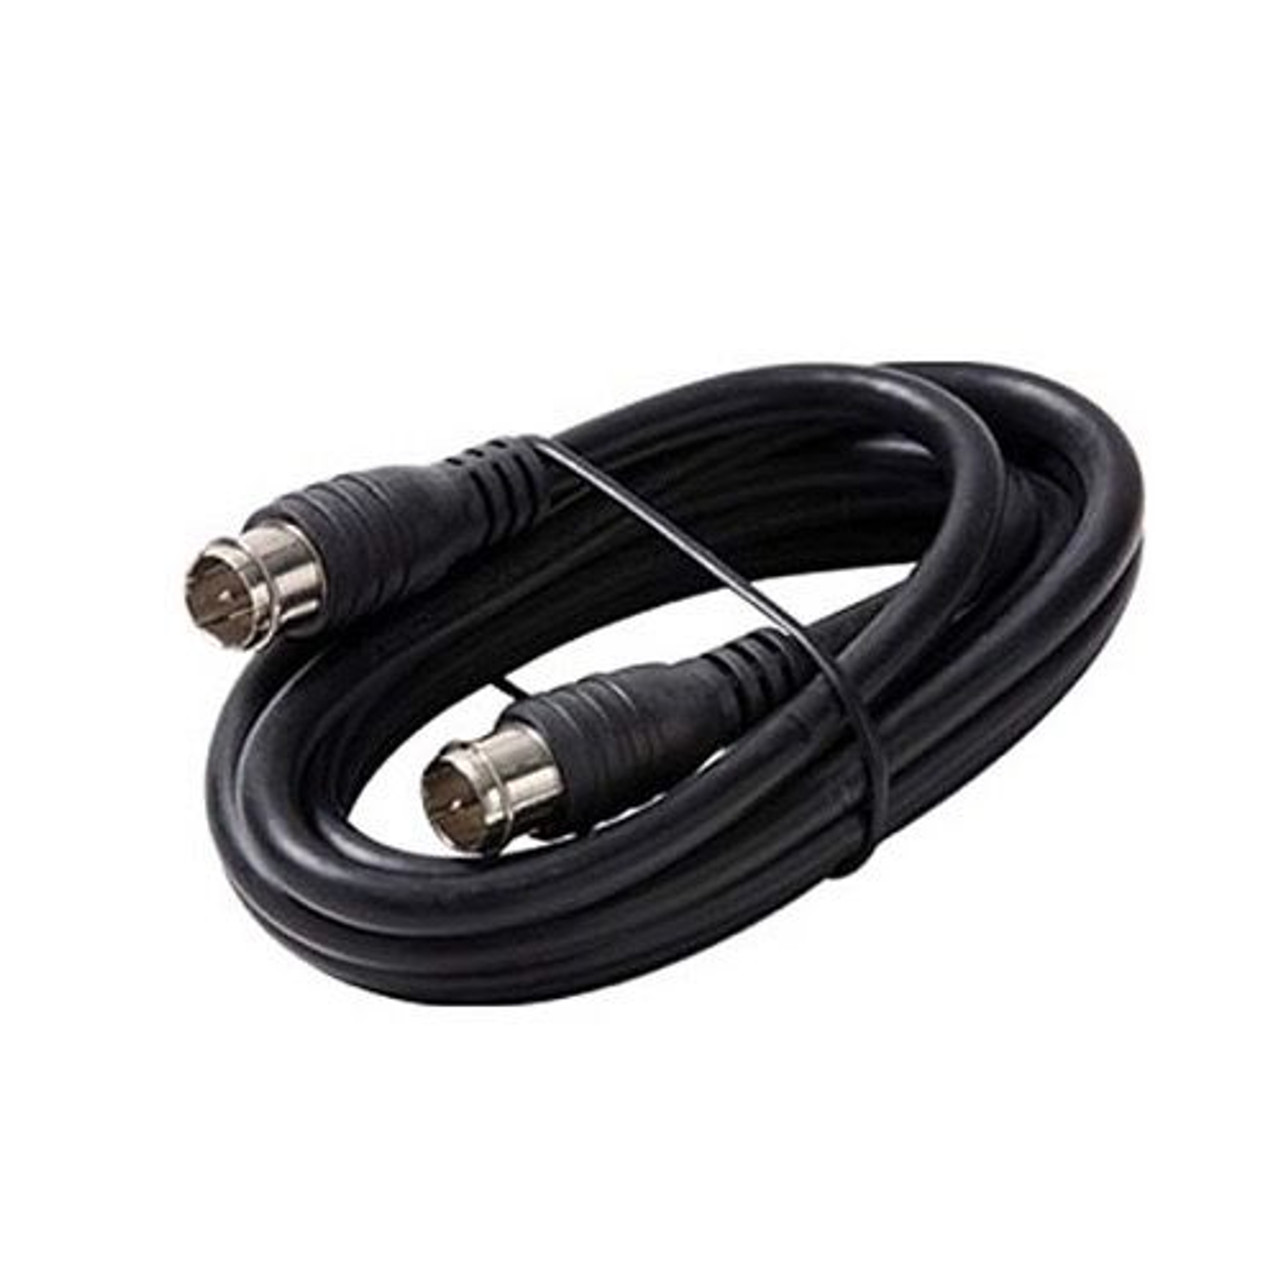 Eagle 12' FT RG59 Coaxial Cable with Quick Disconnect F Connector Each End Black RG-59 Coaxial Jumper Cable TV Video Extension Audio Plug Hook Up